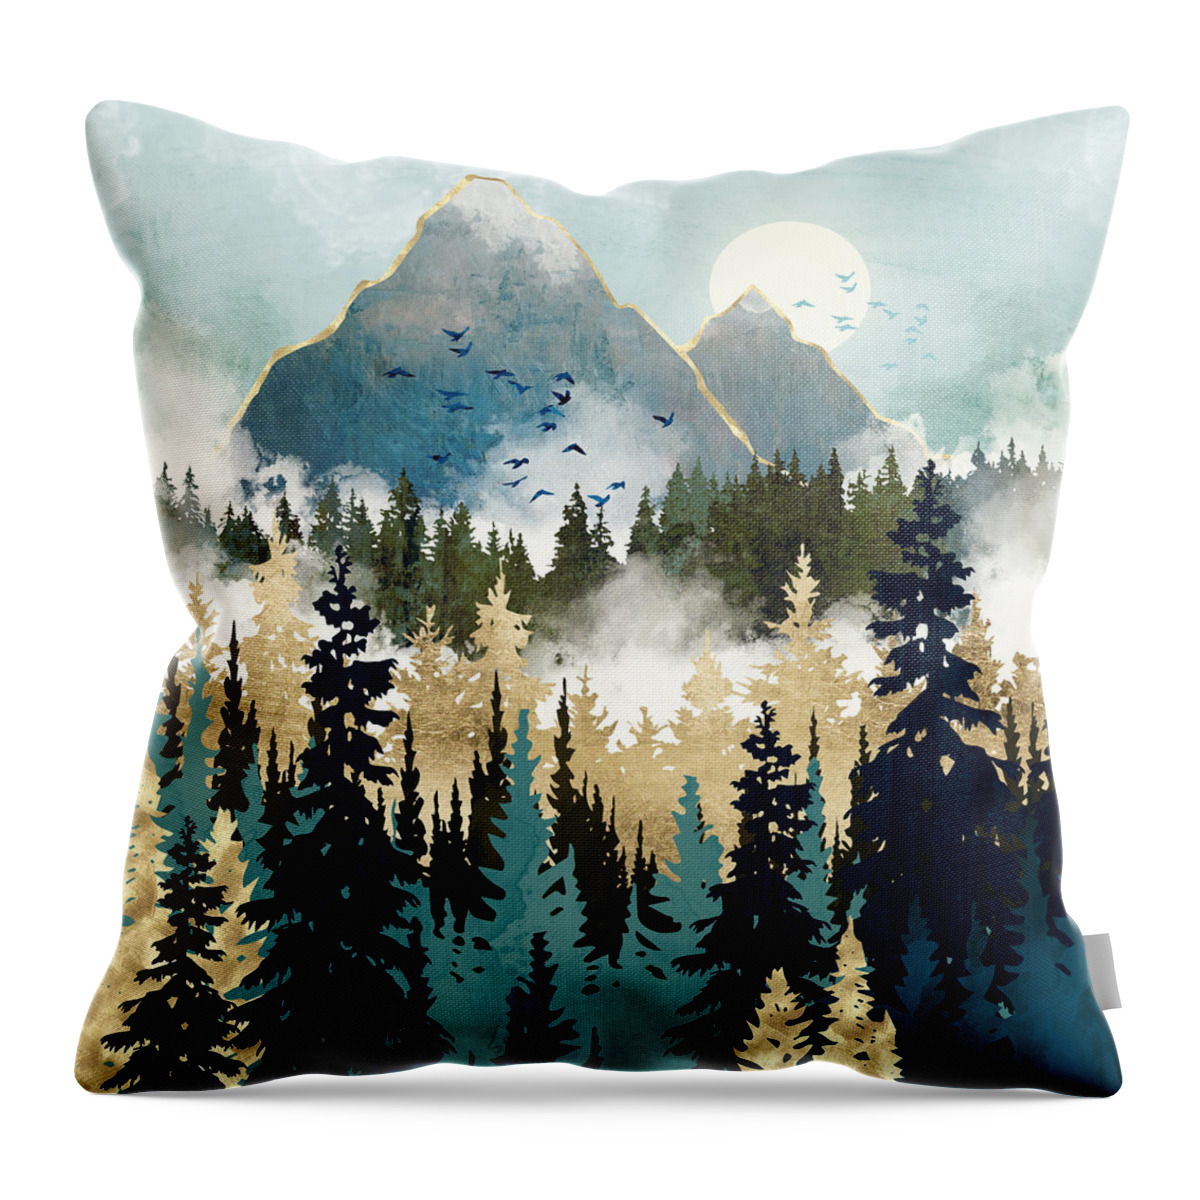 Mist Throw Pillow featuring the digital art Misty Pines by Spacefrog Designs